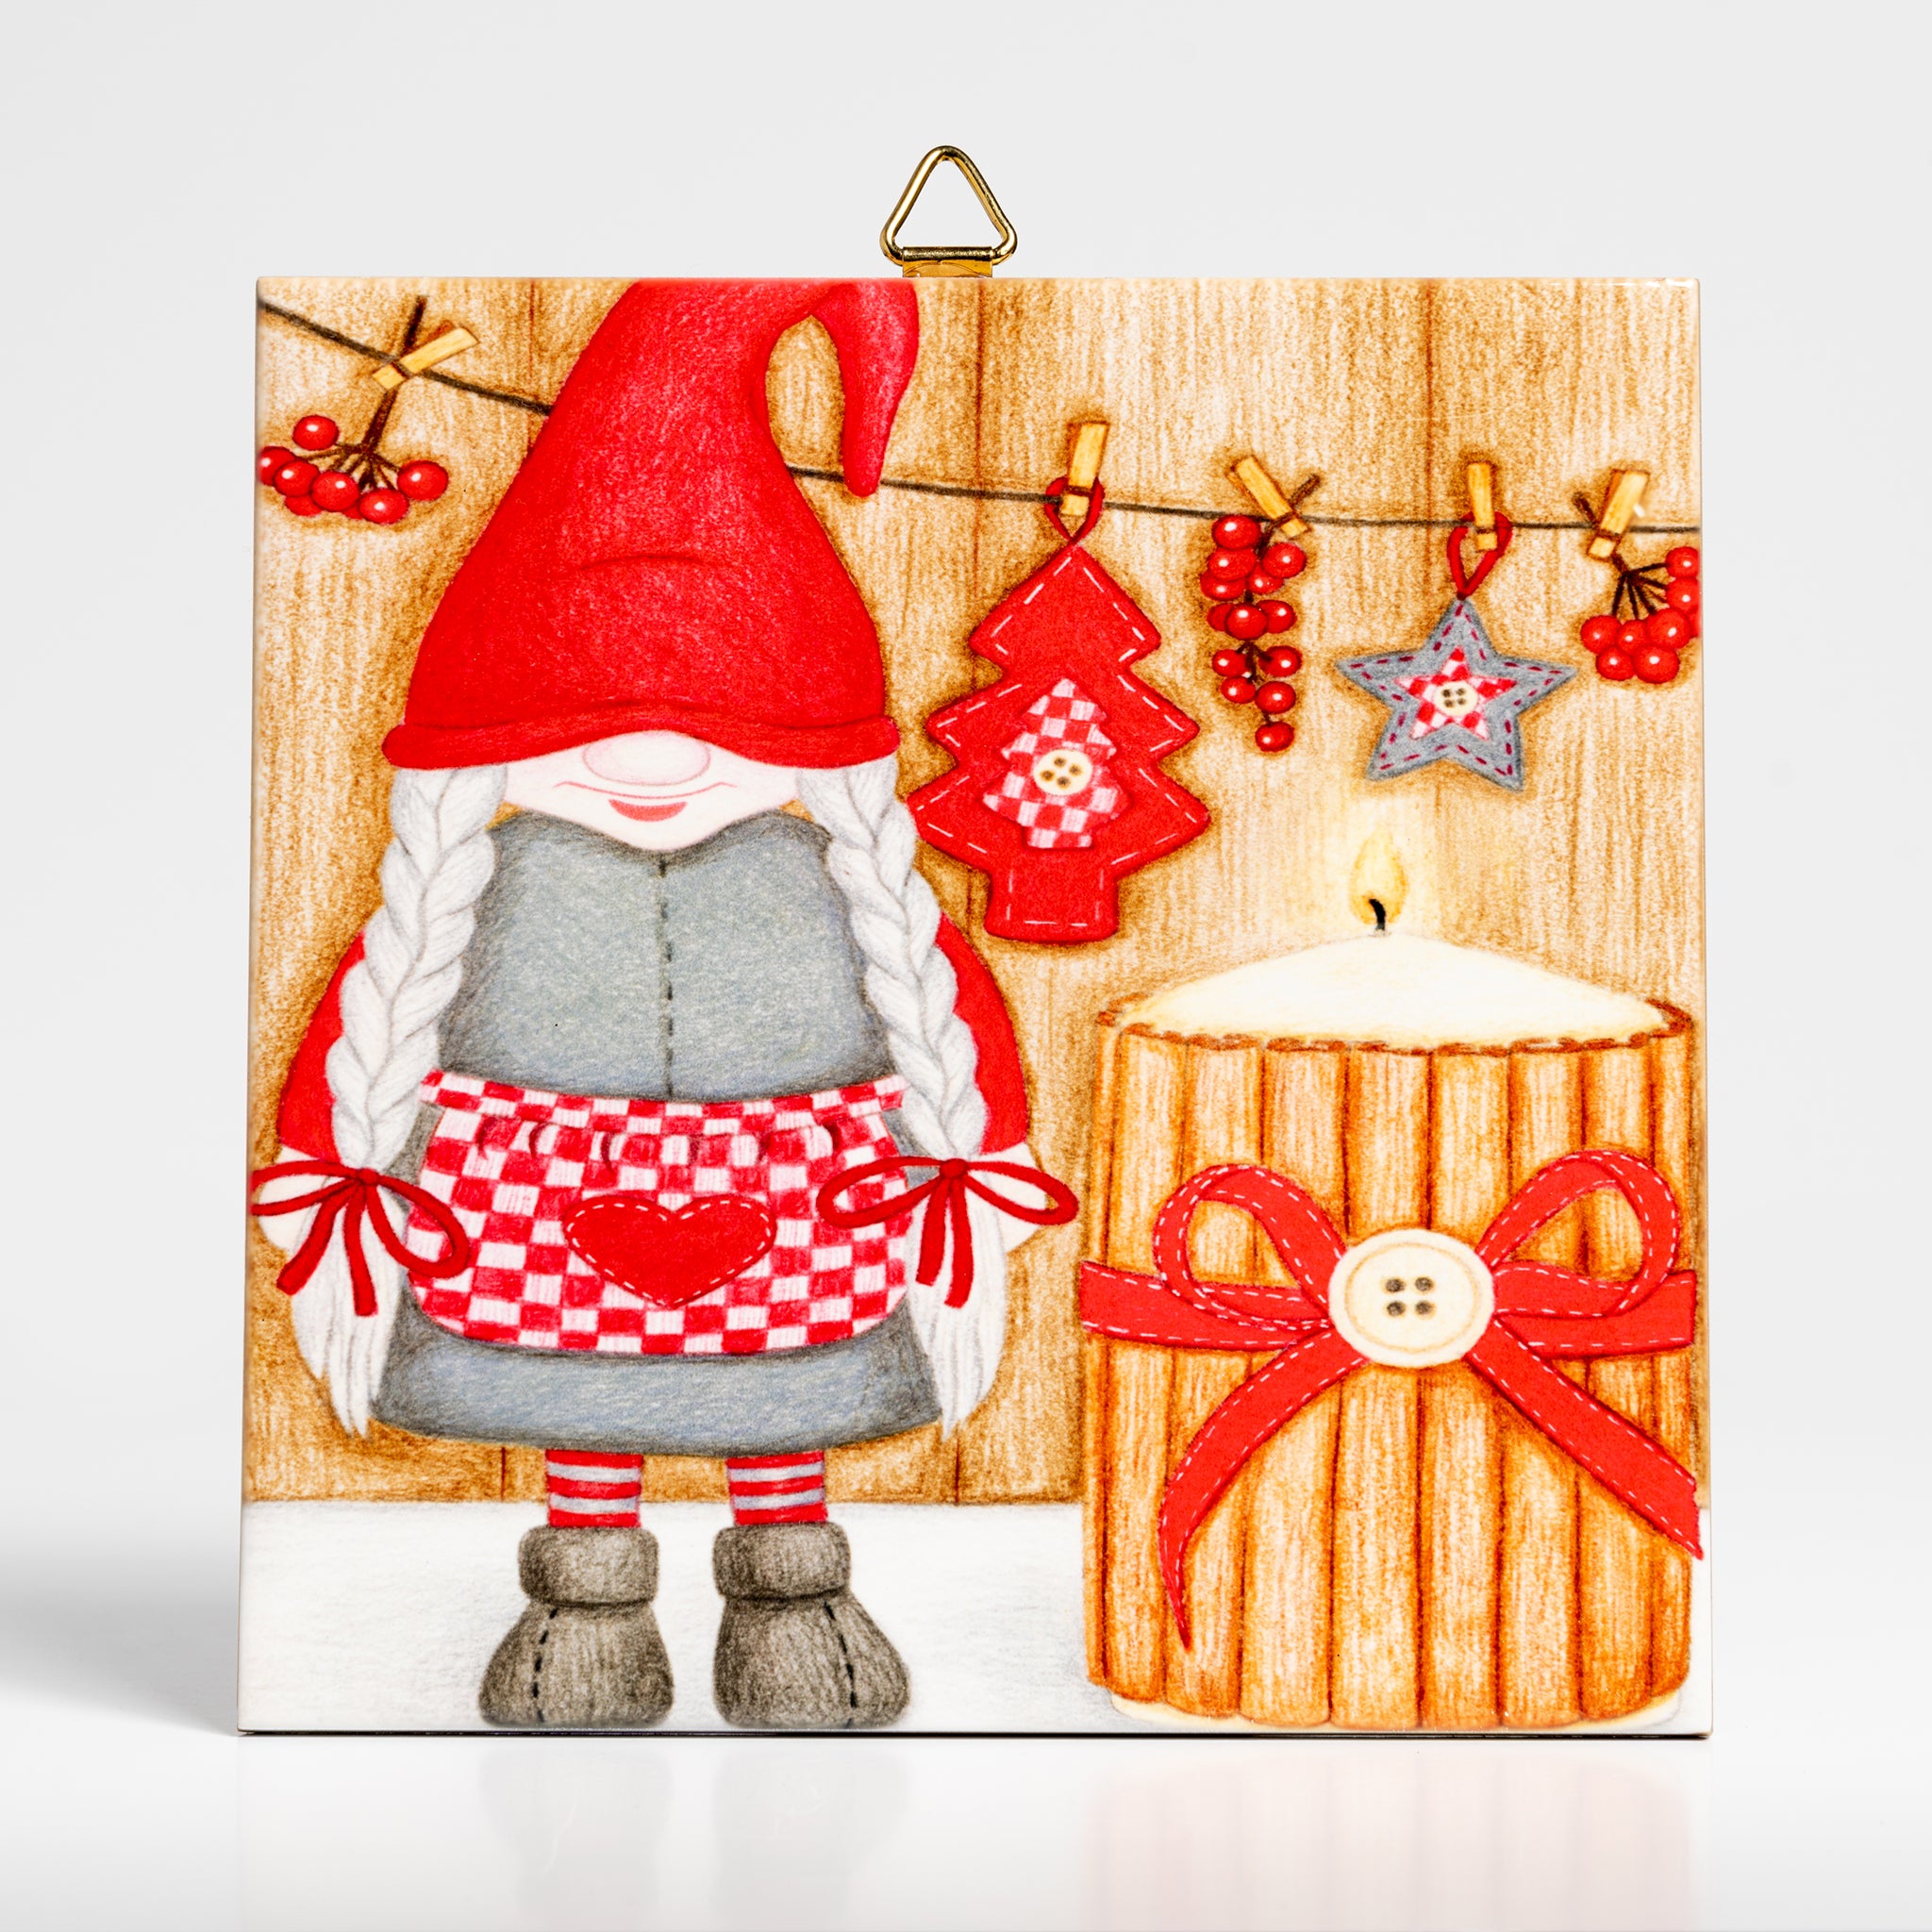 Tomte with Candle Trivet